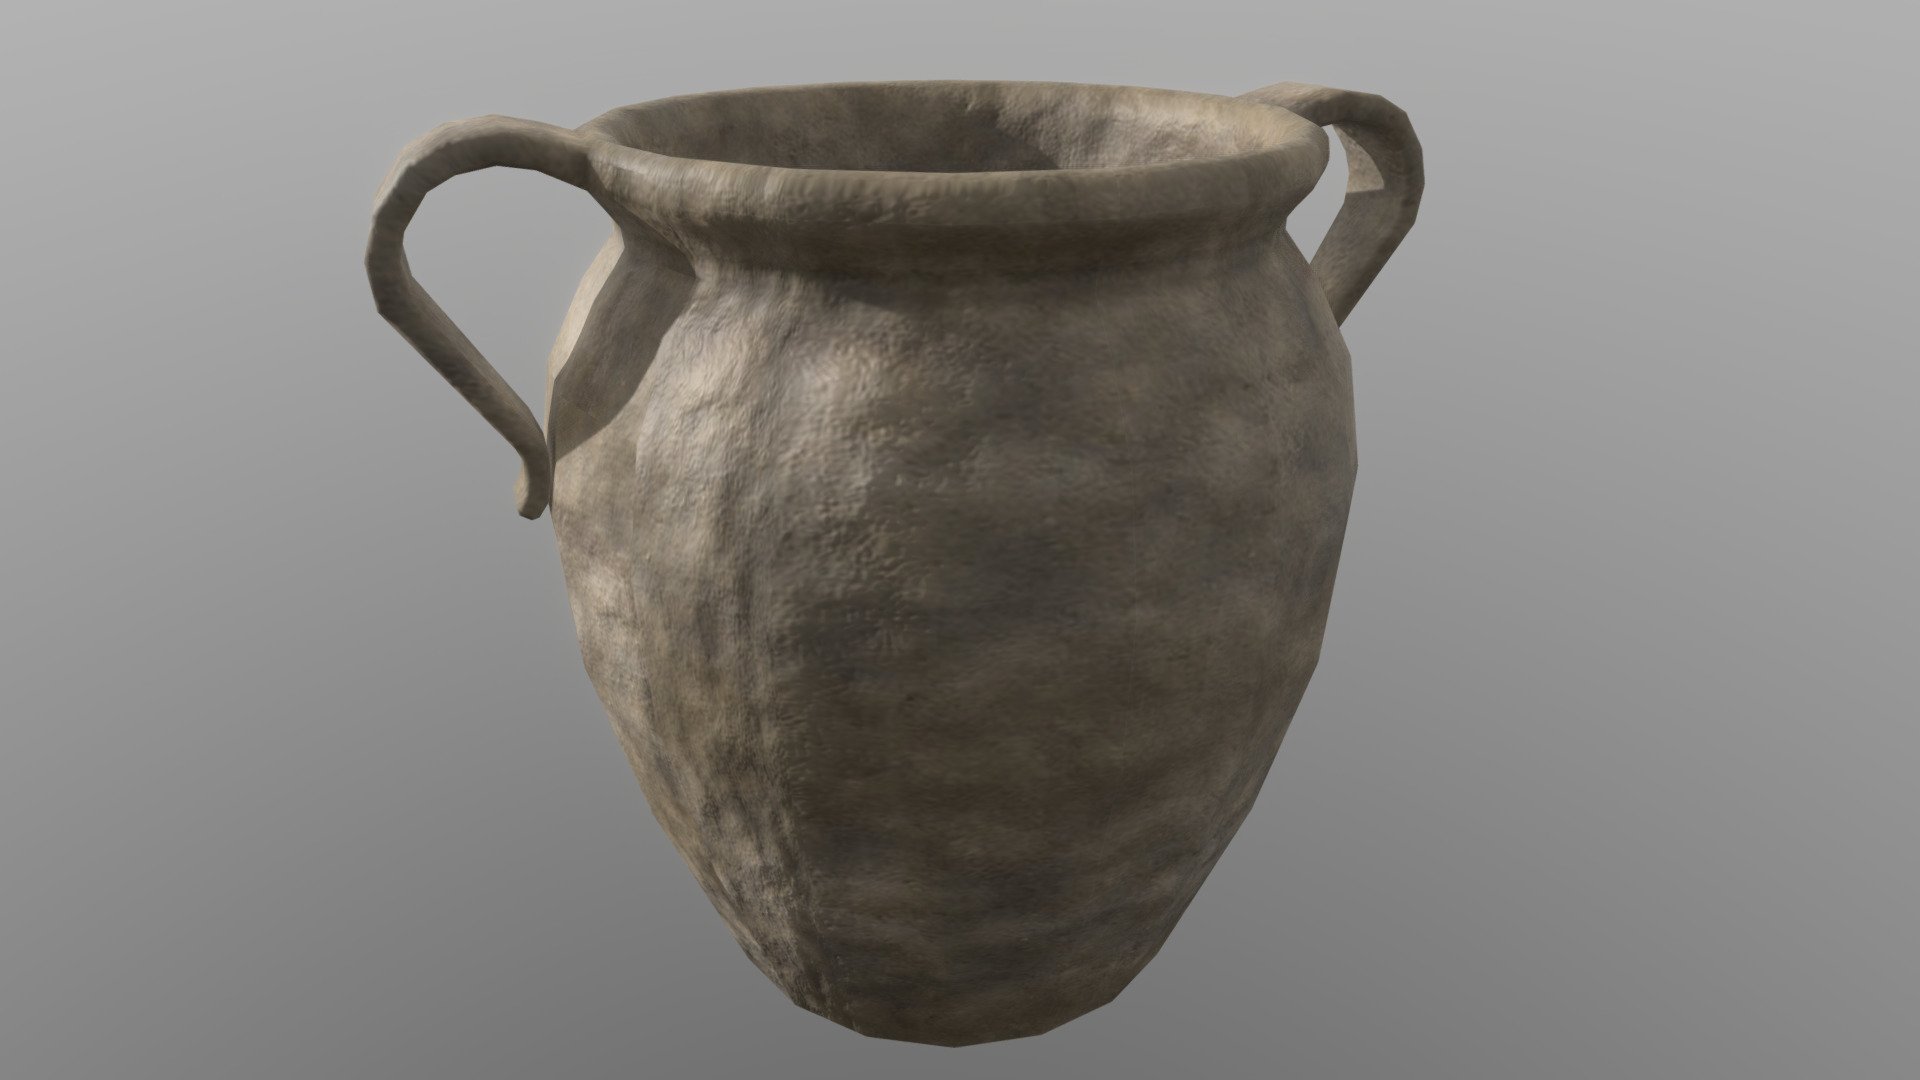 Clay Pot 5 (Viking)
Bring your 3D model of a clay pot to life with this  low-poly design. Perfect for use in games, animations, VR, AR, and more, this model is optimized for performance and still retains a high level of detail.


Features



low poly design with 580 vertices

1,178 edges

600 faces (polygons)

1,156 tris

2k PBR Textures and materials

File formats included: .obj, .fbx, .dae


Tools Used
This Clay Pot 3D model was created using Blender 3.3.1, a popular and versatile 3D creation software.


Availability
This low-poly Clay Pot 3D model is ready for use and available for purchase. Bring your project to the next level with this high-quality and optimized model 3d model